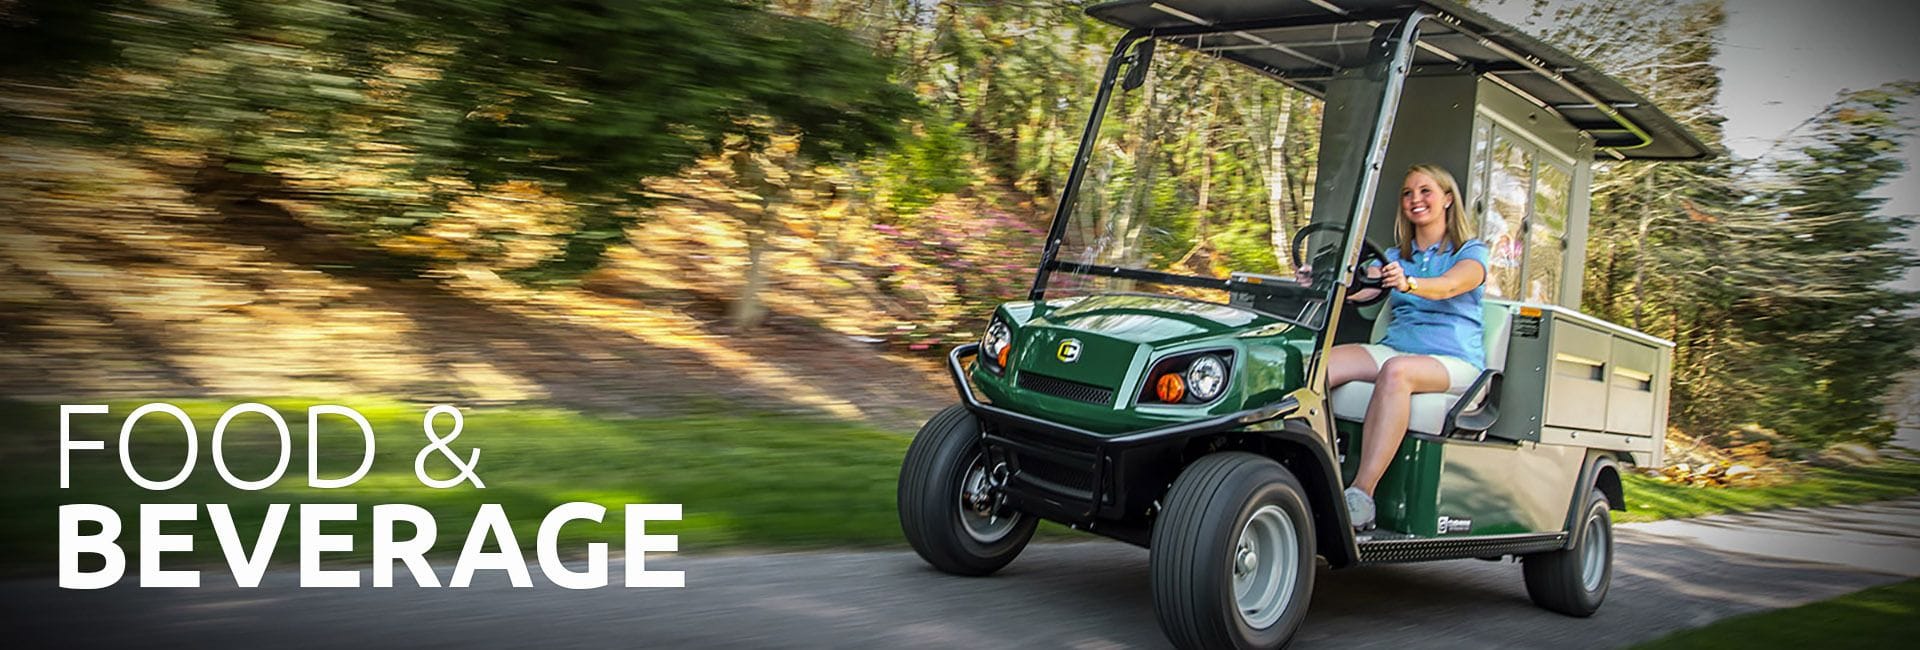 New Food and Beverage Vehicles | Golf Car World 